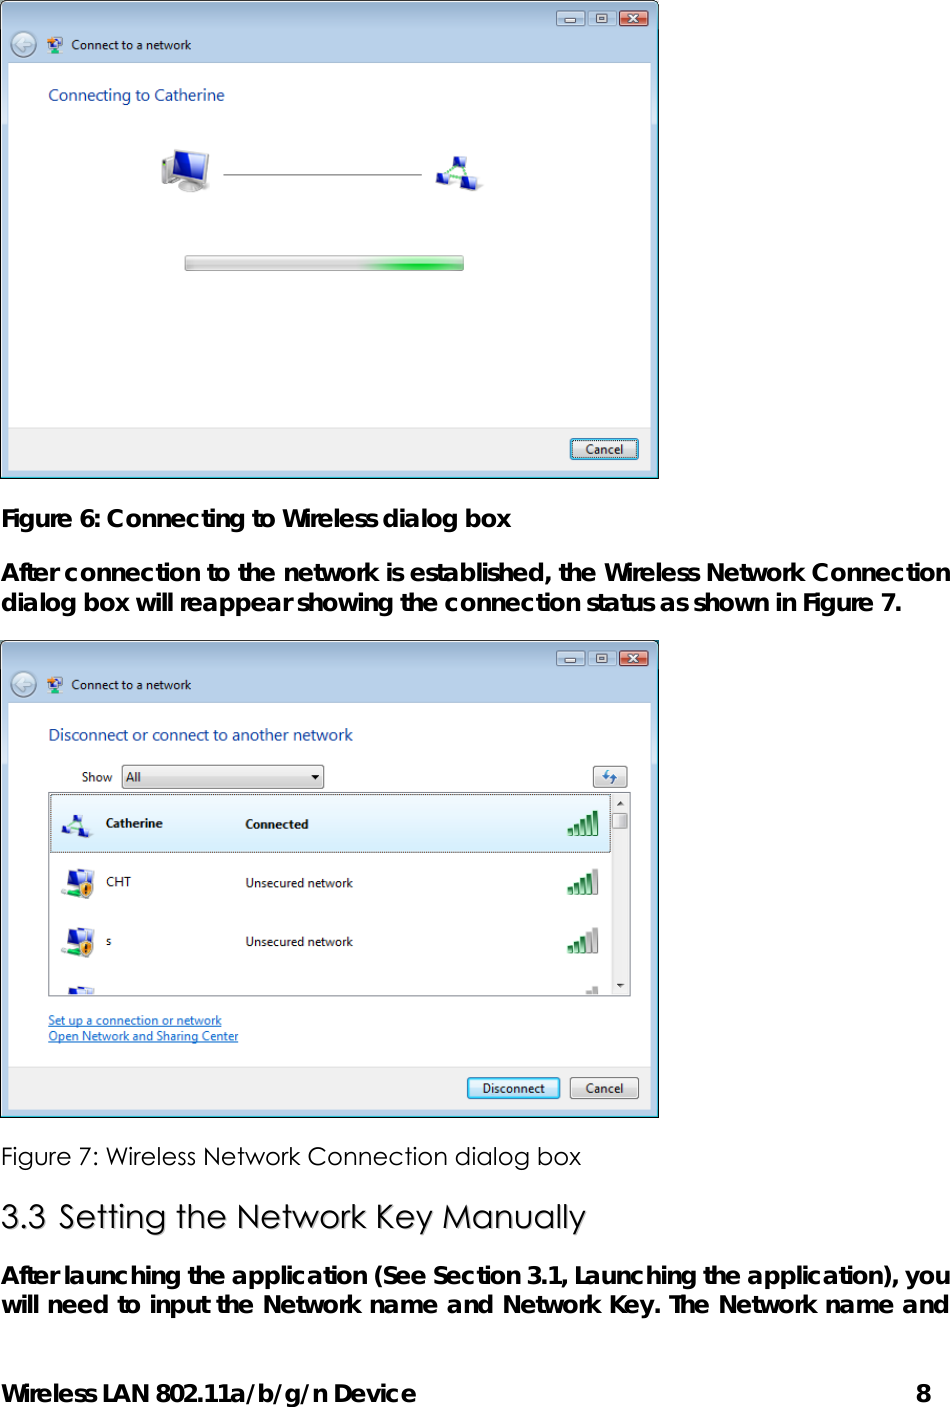 Wireless LAN 802.11a/b/g/n Device                                         8  Figure 6: Connecting to Wireless dialog box After connection to the network is established, the Wireless Network Connection dialog box will reappear showing the connection status as shown in Figure 7.    Figure 7: Wireless Network Connection dialog box 33..33  SSeettttiinngg  tthhee  NNeettwwoorrkk  KKeeyy  MMaannuuaallllyy  After launching the application (See Section 3.1, Launching the application), you will need to input the Network name and Network Key. The Network name and 